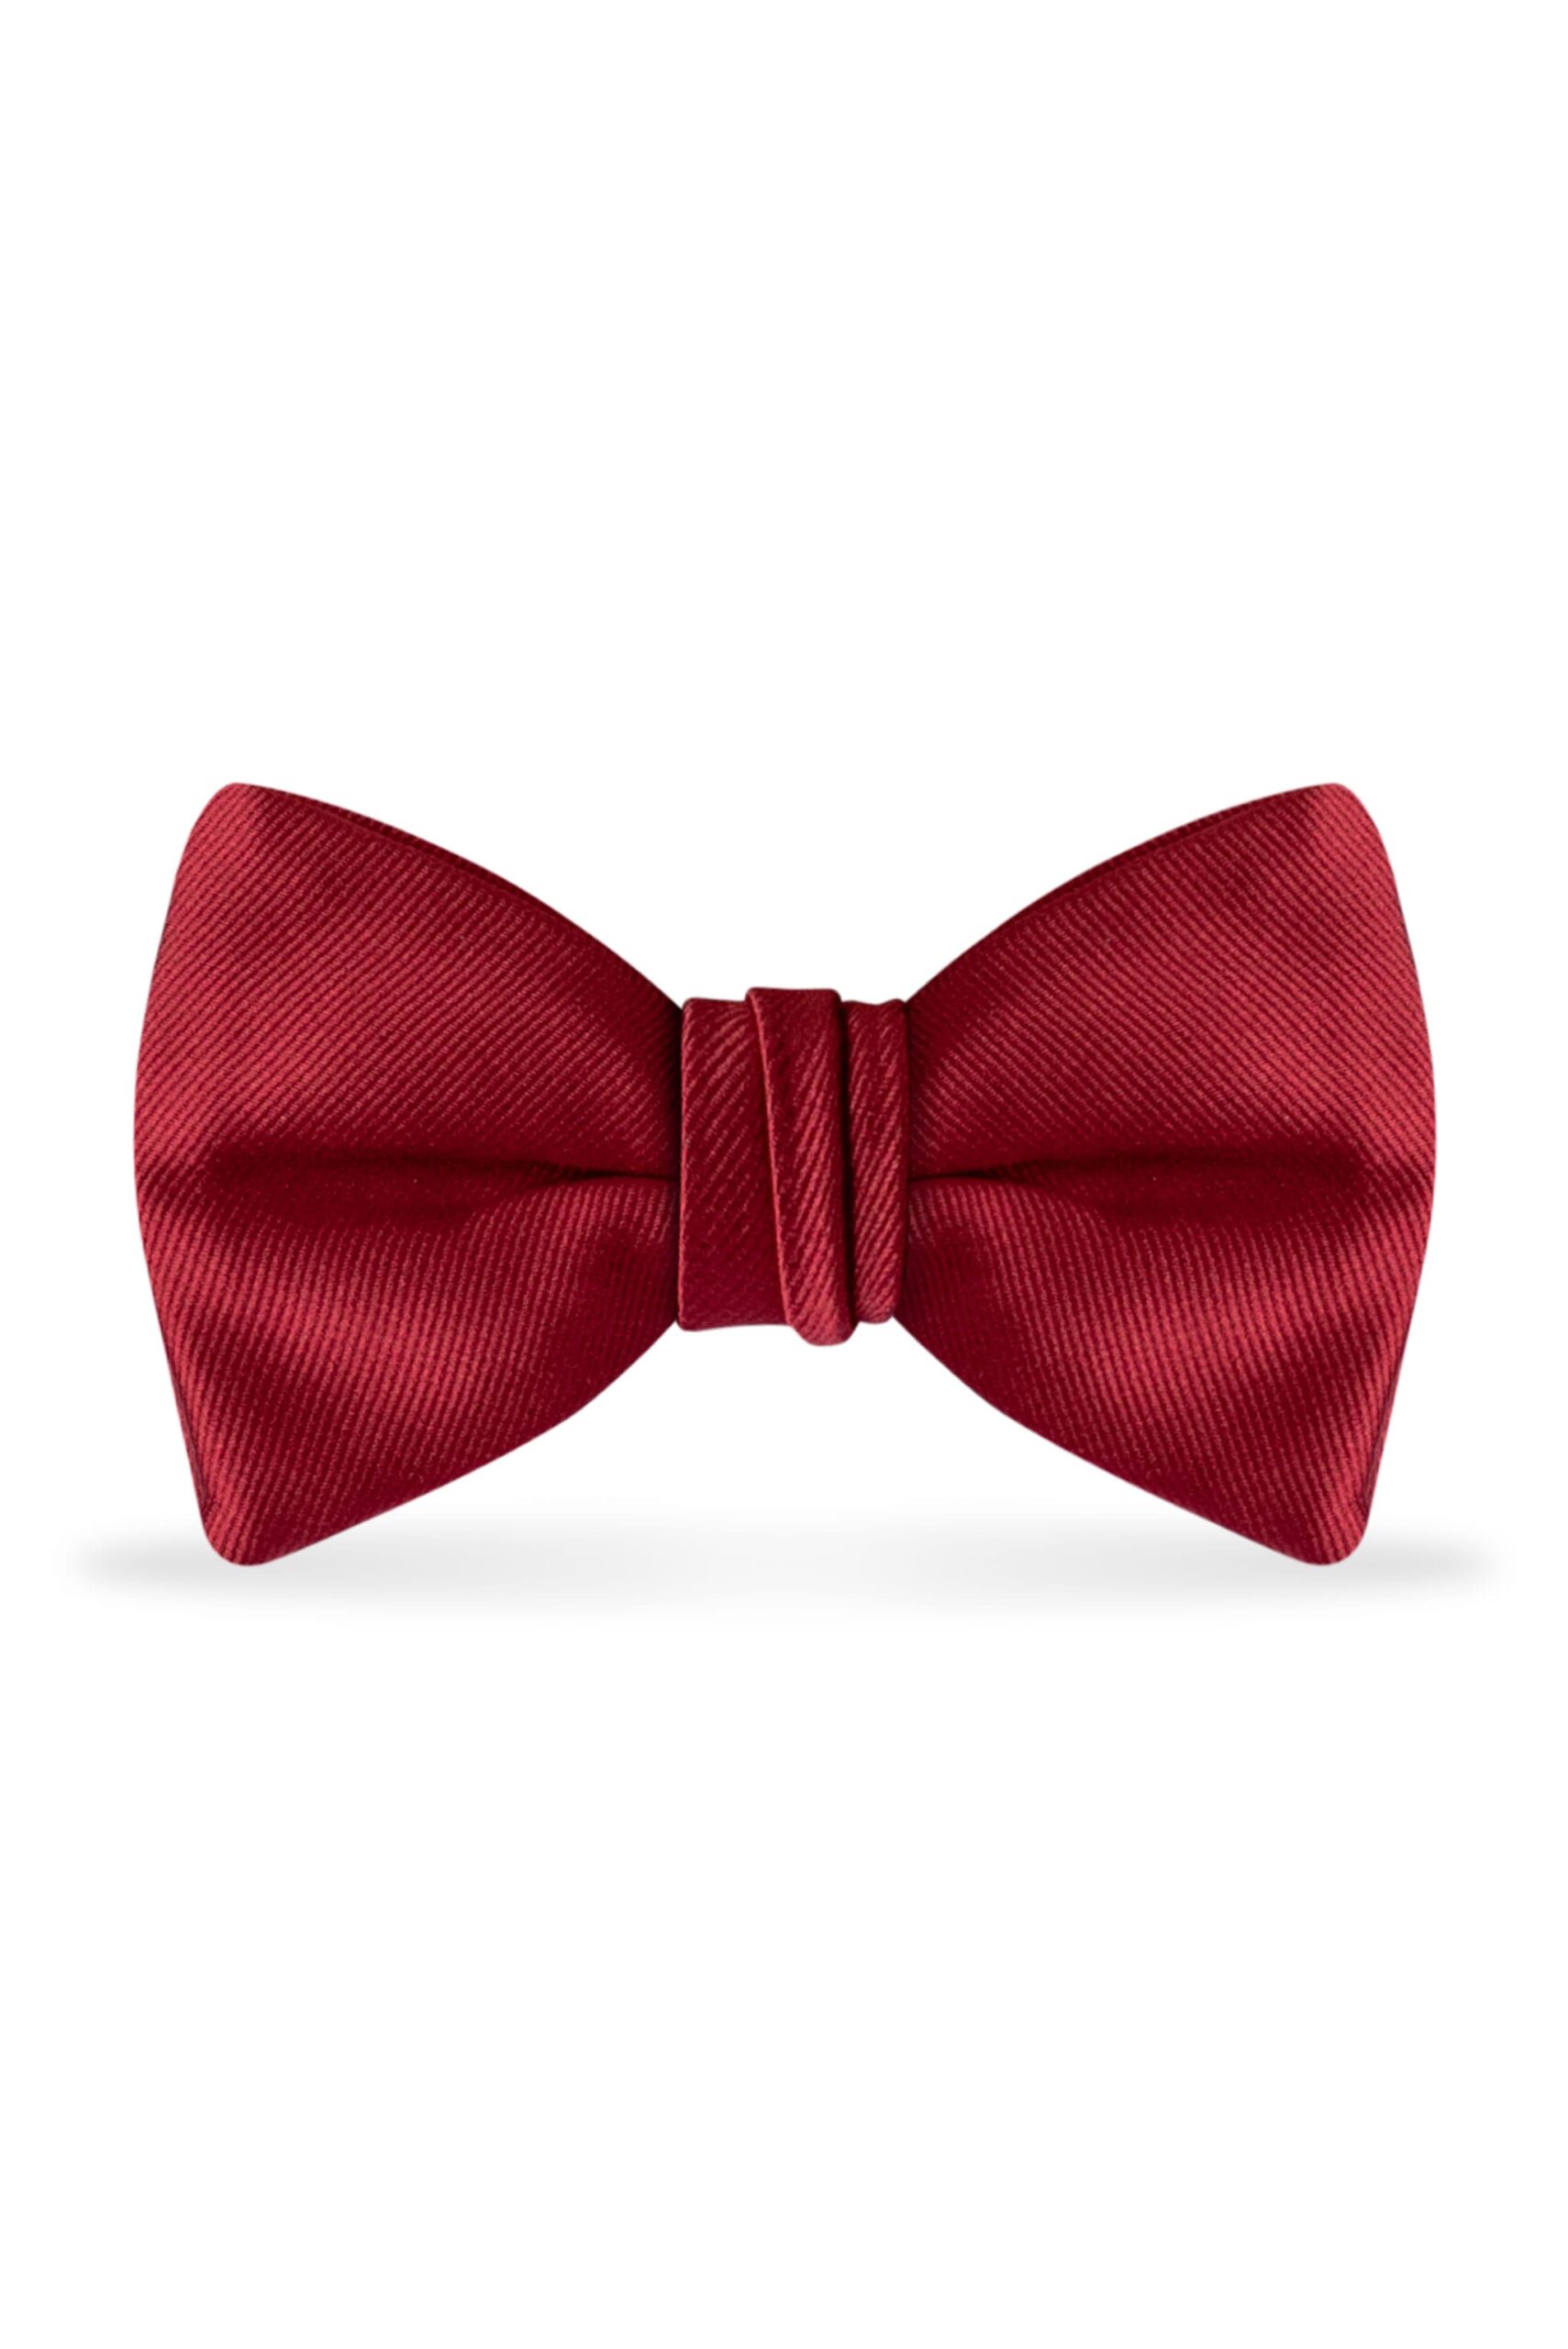 Solid Apple Red Bow Tie 1